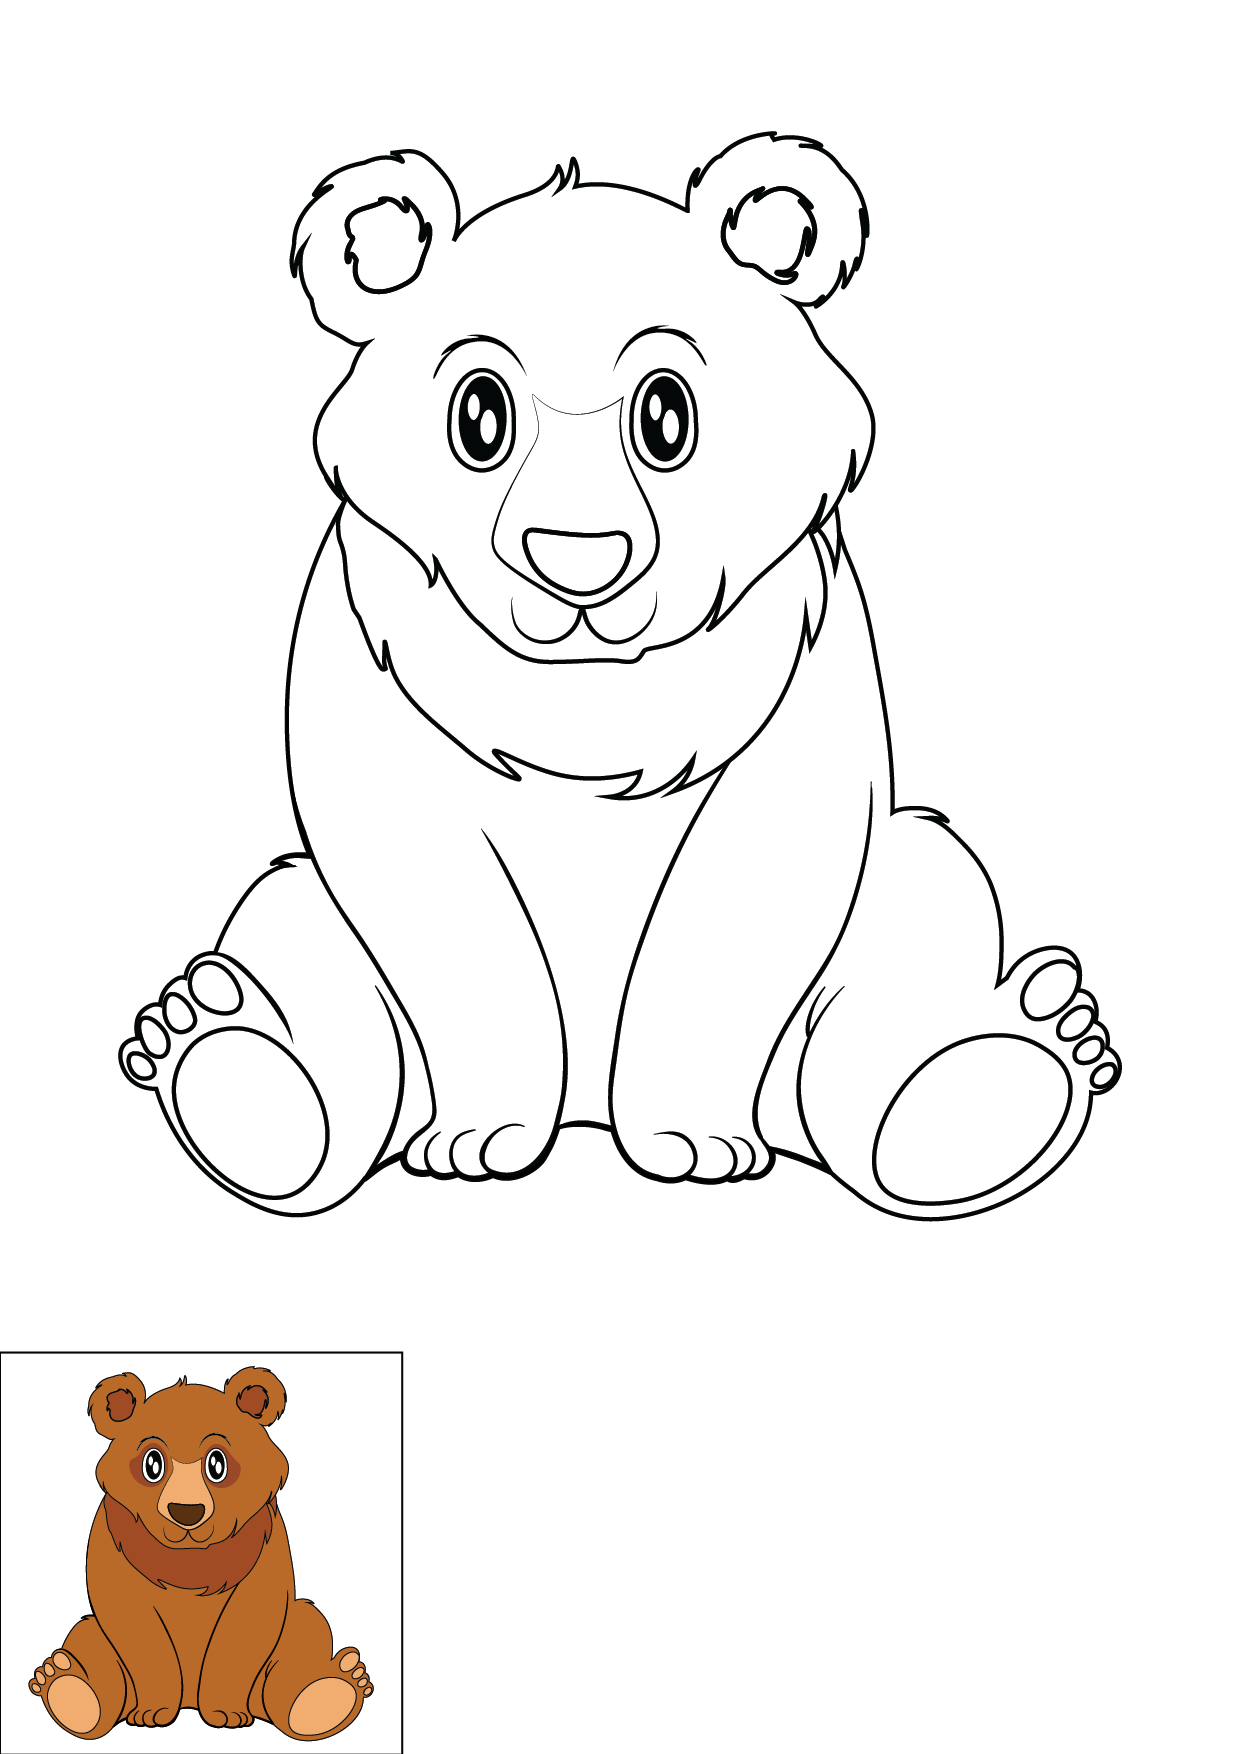 How to Draw A Bear Step by Step Printable Color